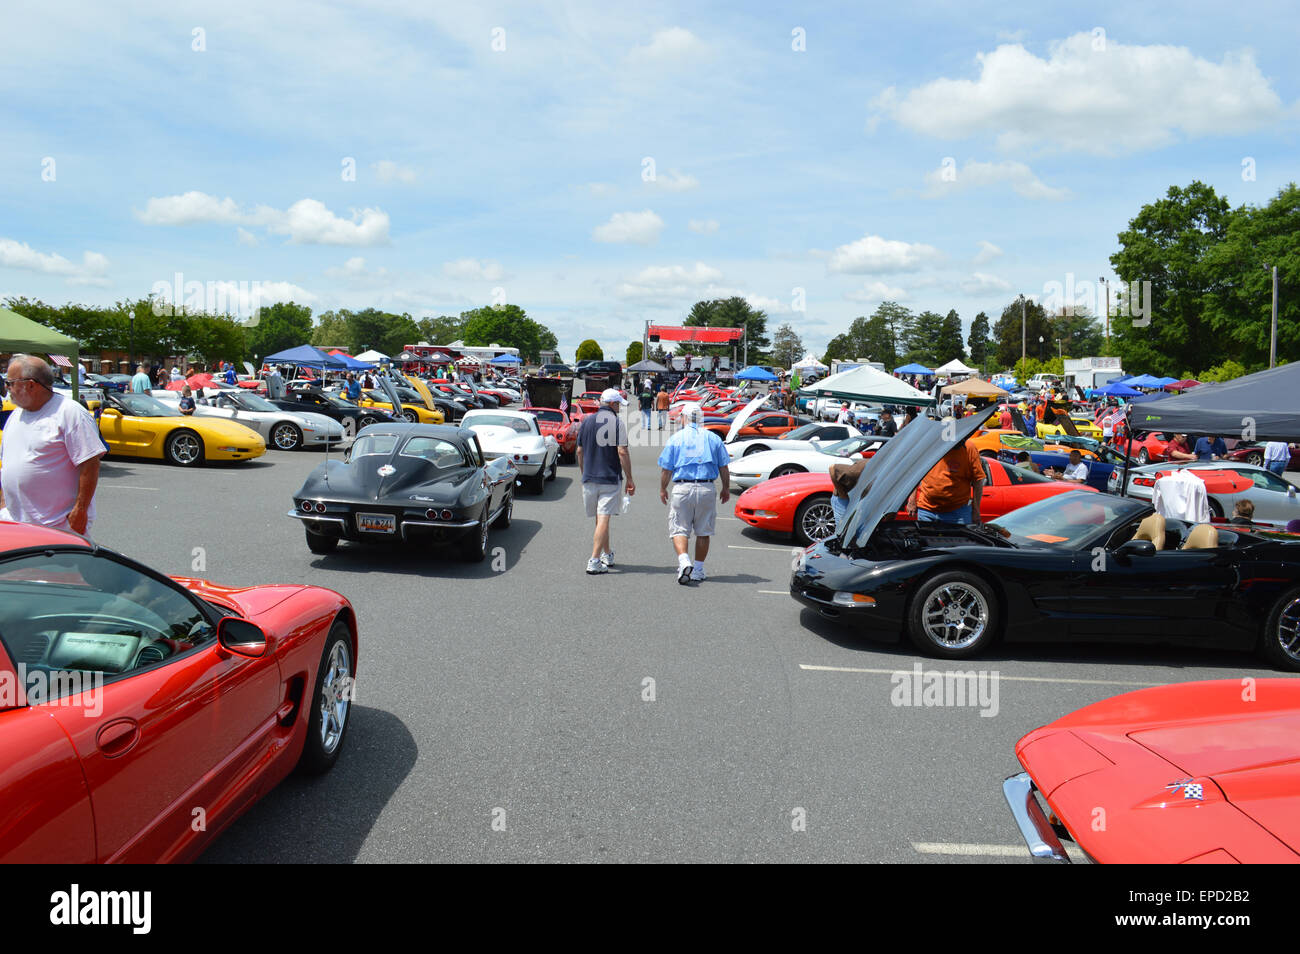 A local Corvette Car Show with all vintages of Corvettes. Stock Photo